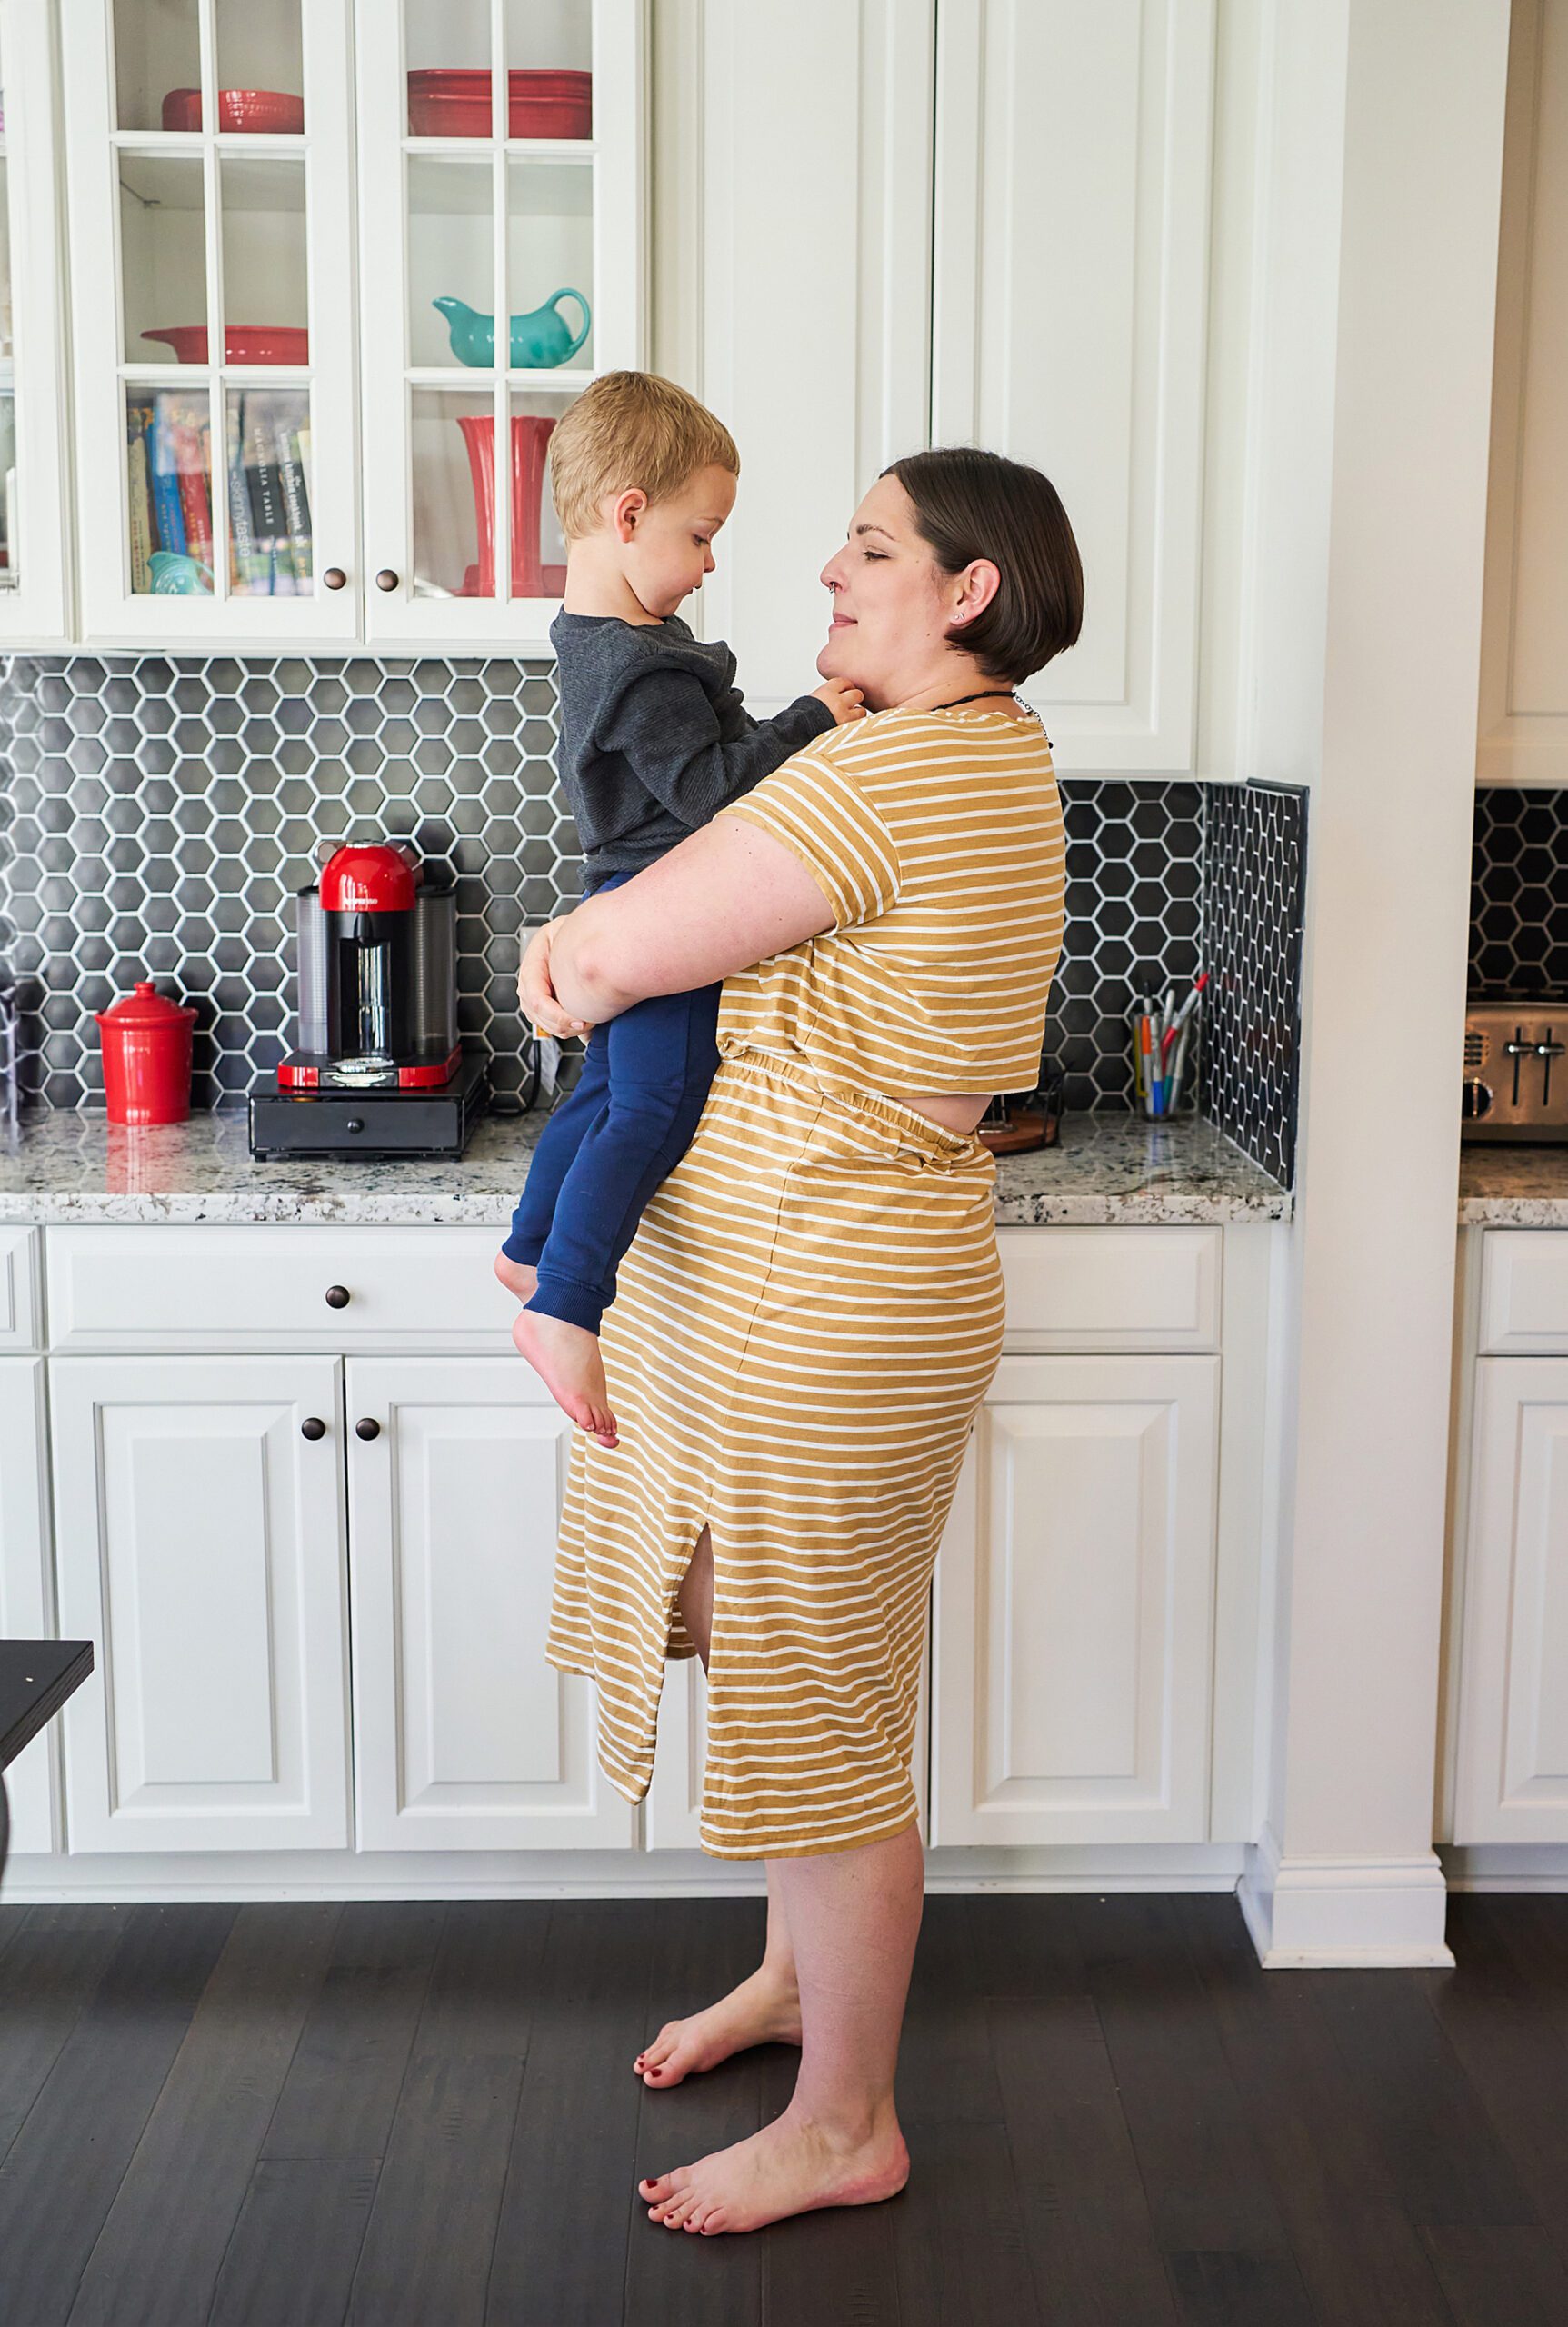 A mother holding her young son in a modern kitchen.